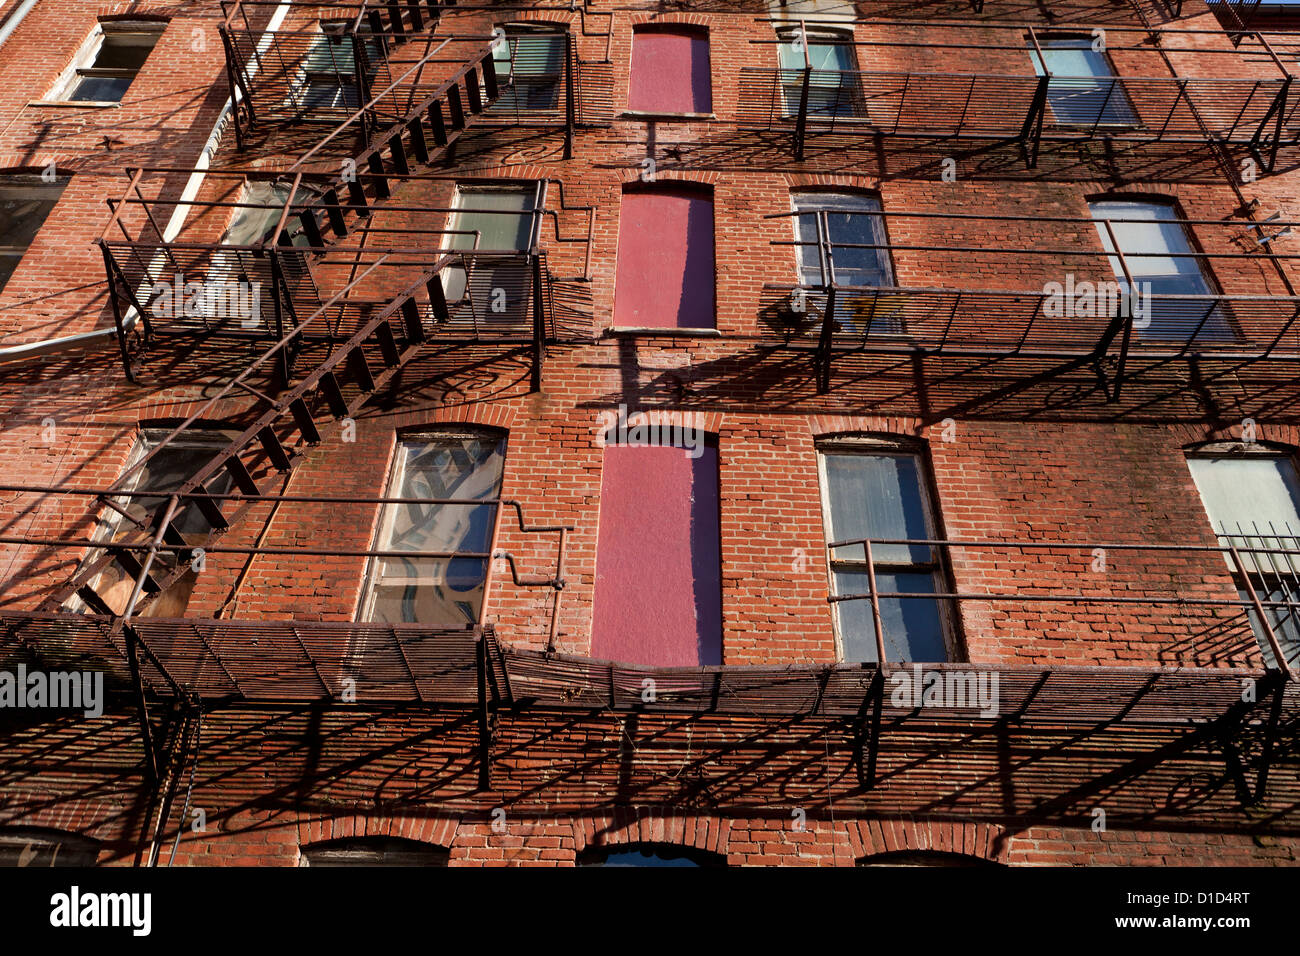 Fire escape stairs on an old brick apartment building Stock Photo